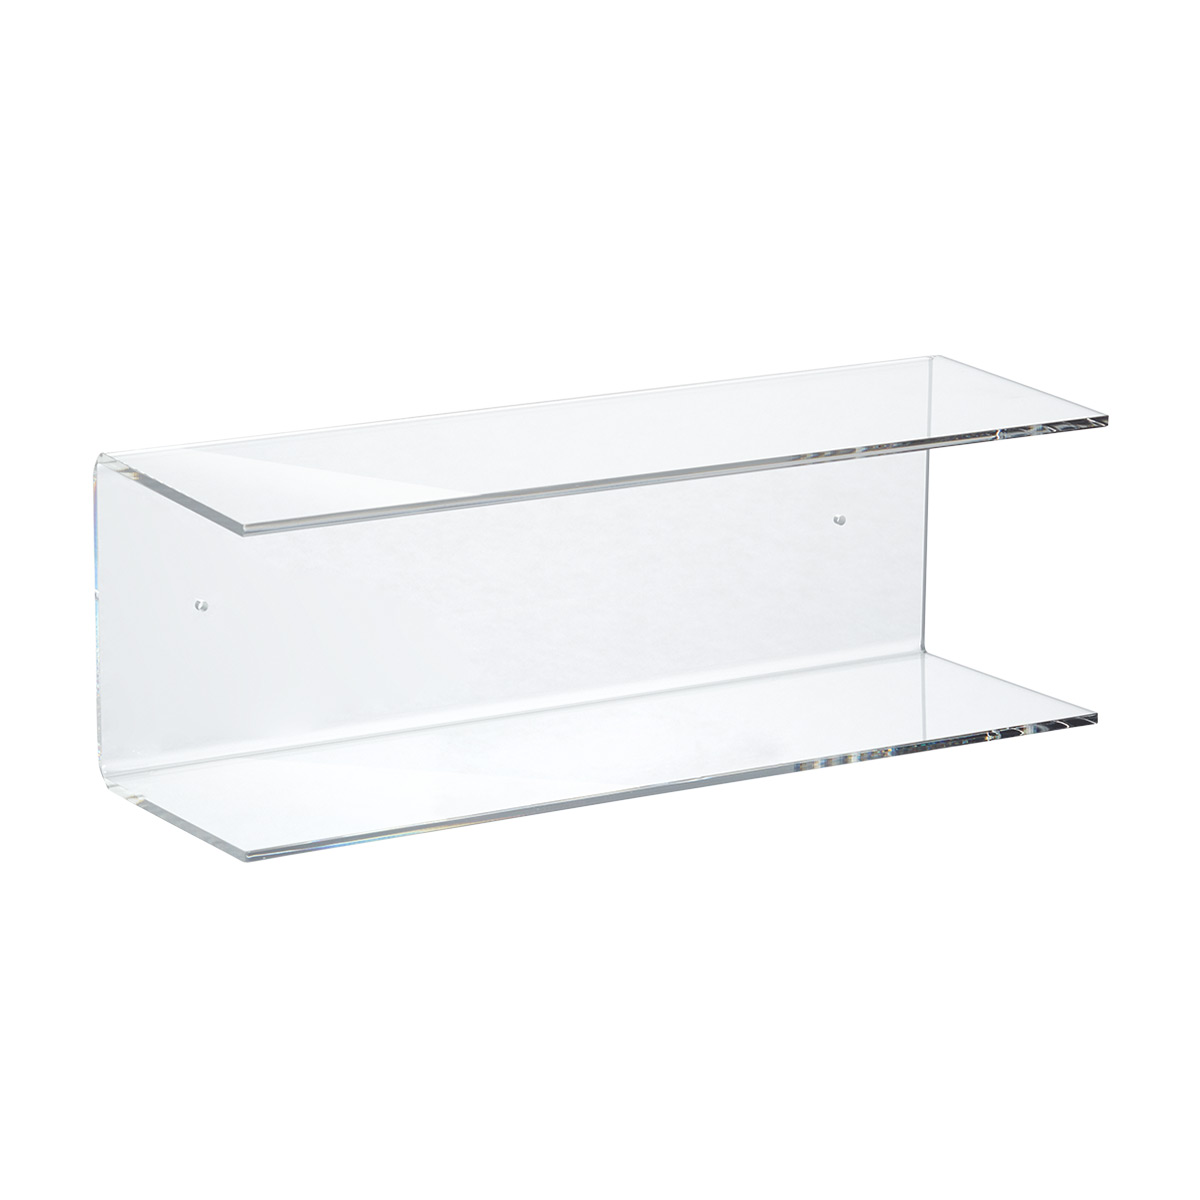 Double Acrylic Wall Shelf | The Container Store